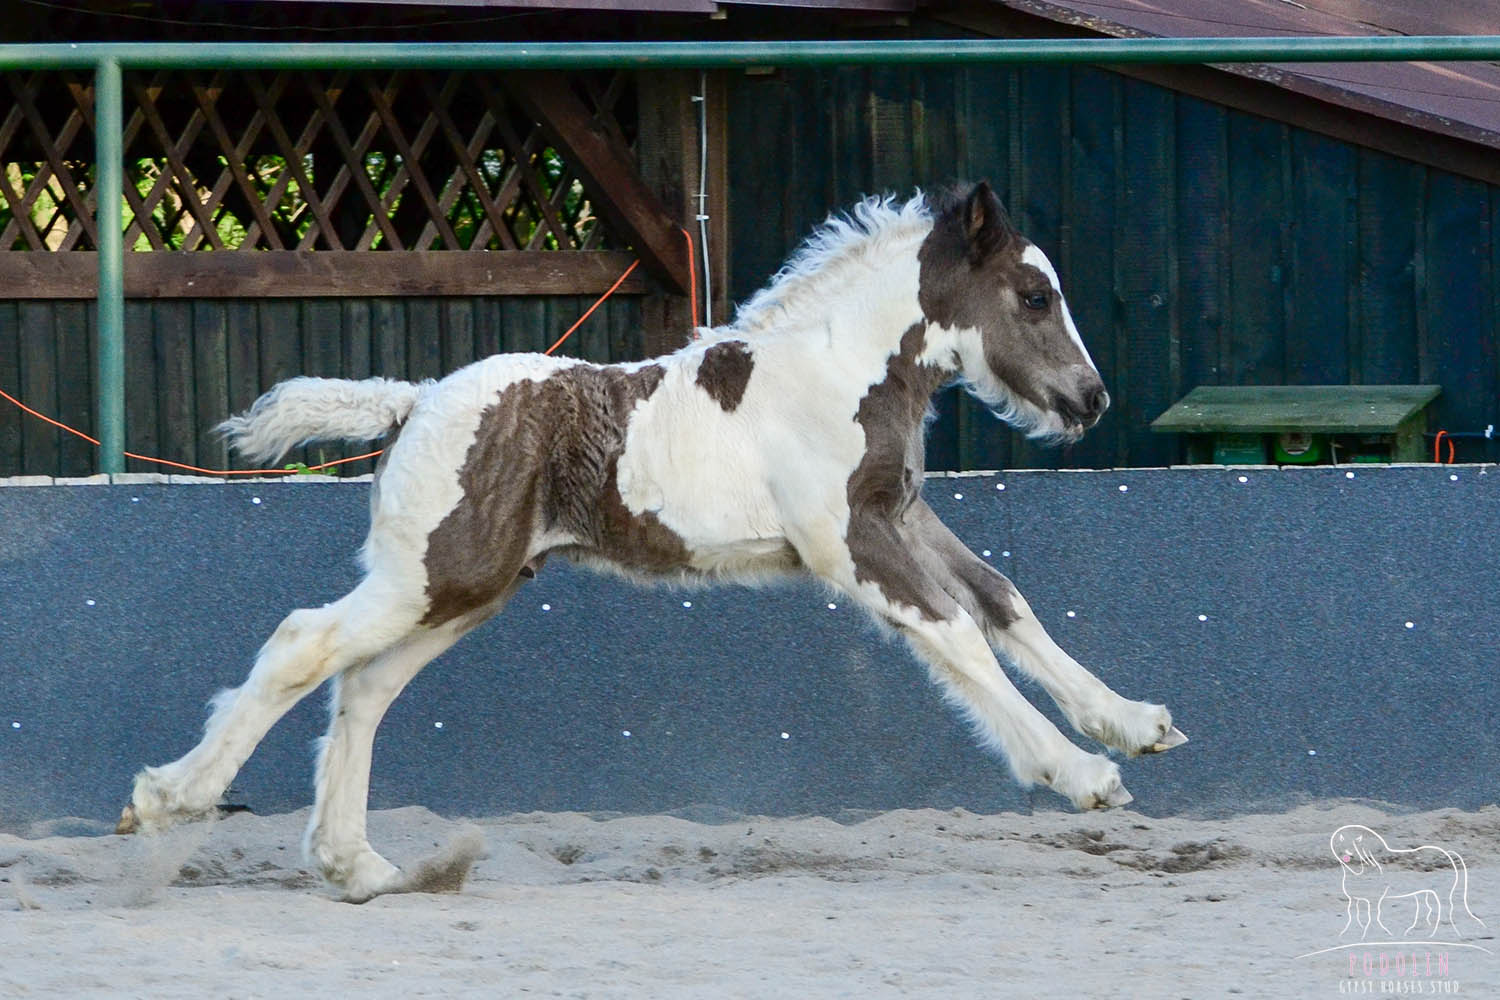 Black and White Gypsy Cob Foal